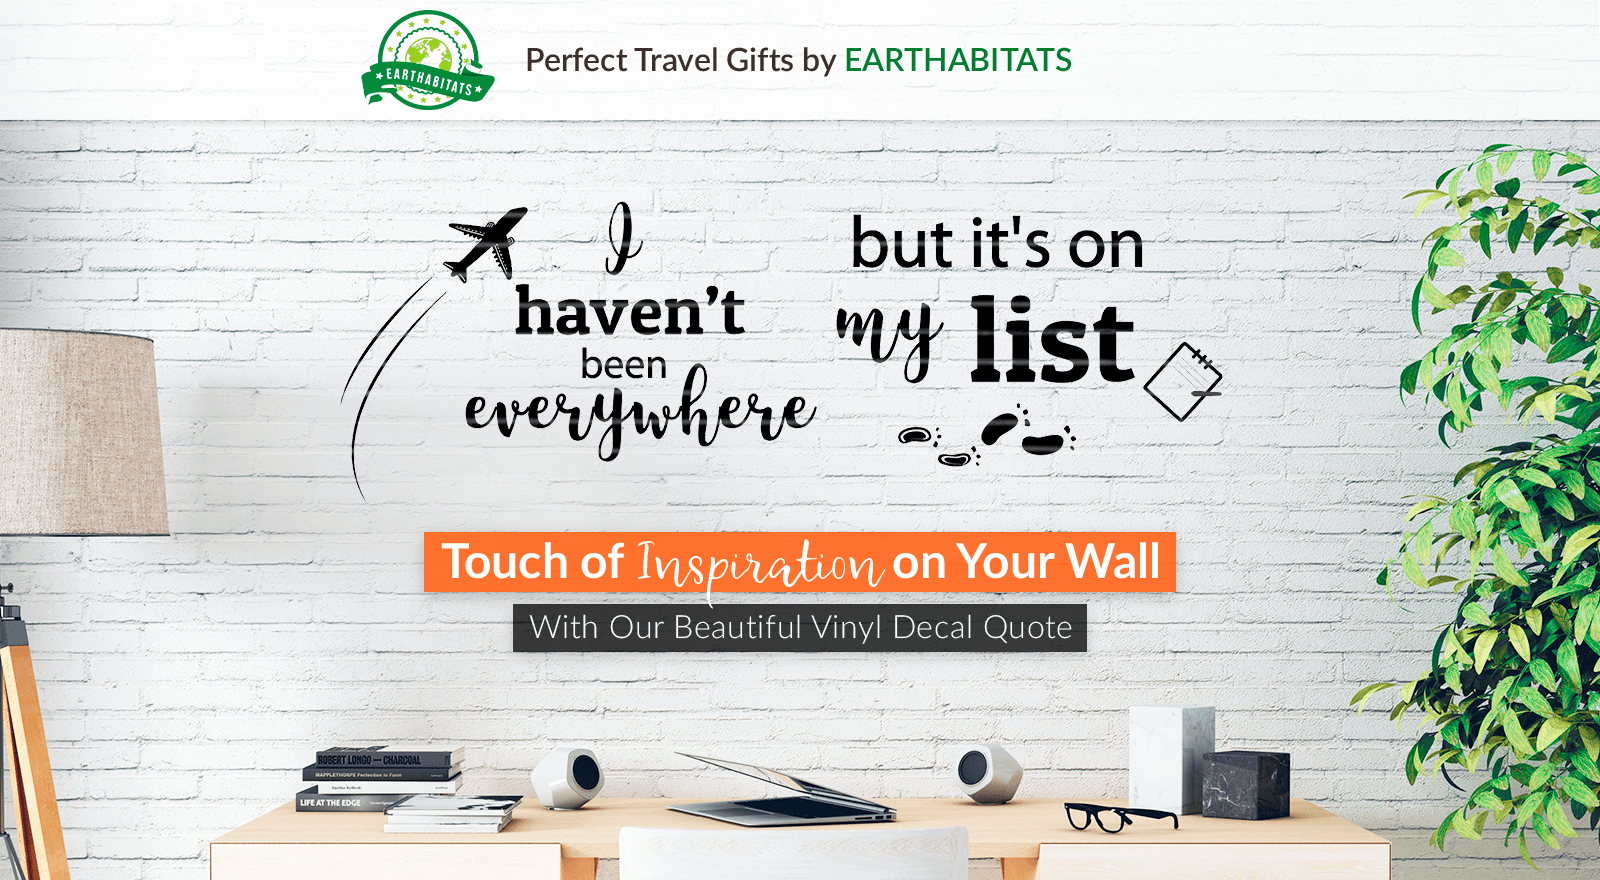 Earthabitats Vinyl Decal Quote for Wall, best travel decal, perfect gift for travelers